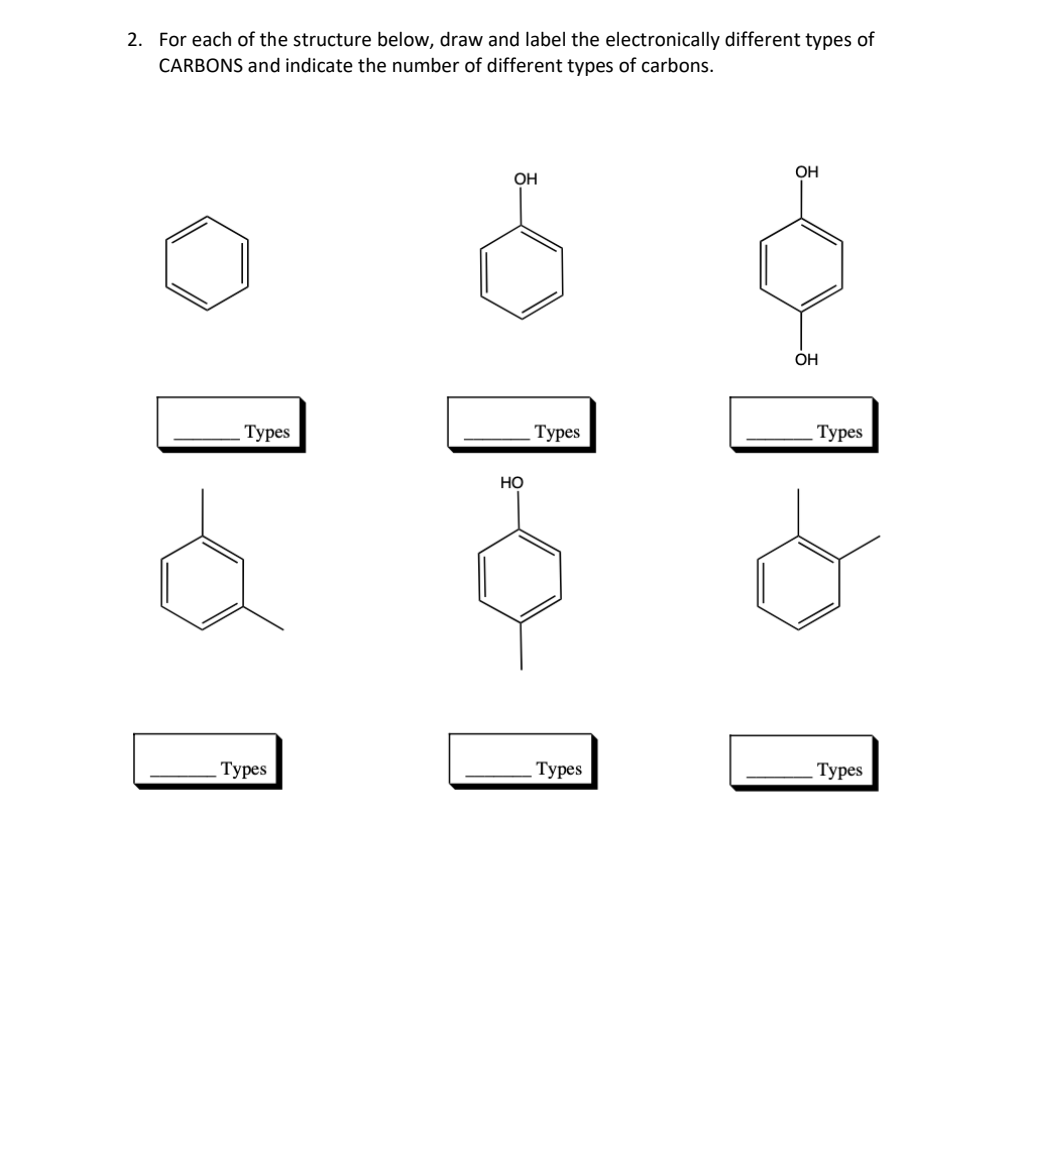 2. For each of the structure below, draw and label the electronically different types of
CARBONS and indicate the number of different types of carbons.
OH
OH
OH
Турes
Турes
Турes
HO
Туpes
Турes
Туpes
